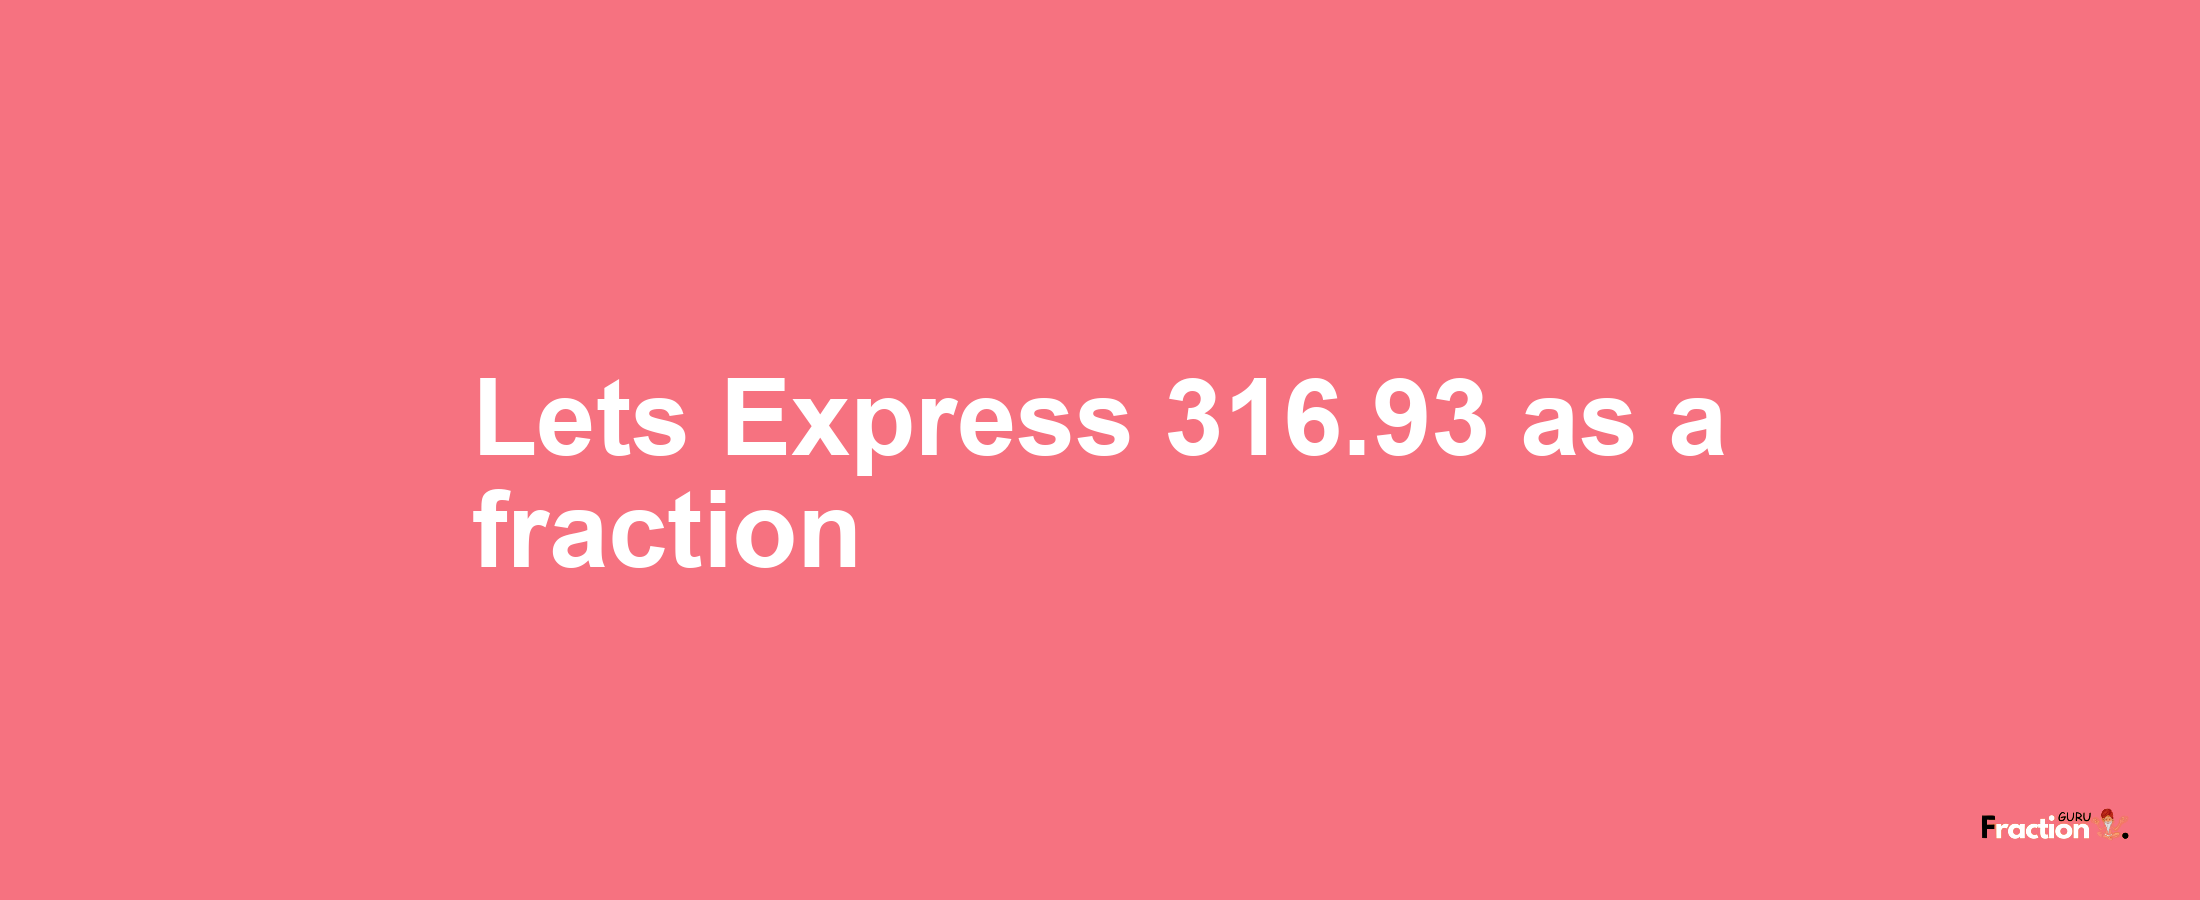 Lets Express 316.93 as afraction